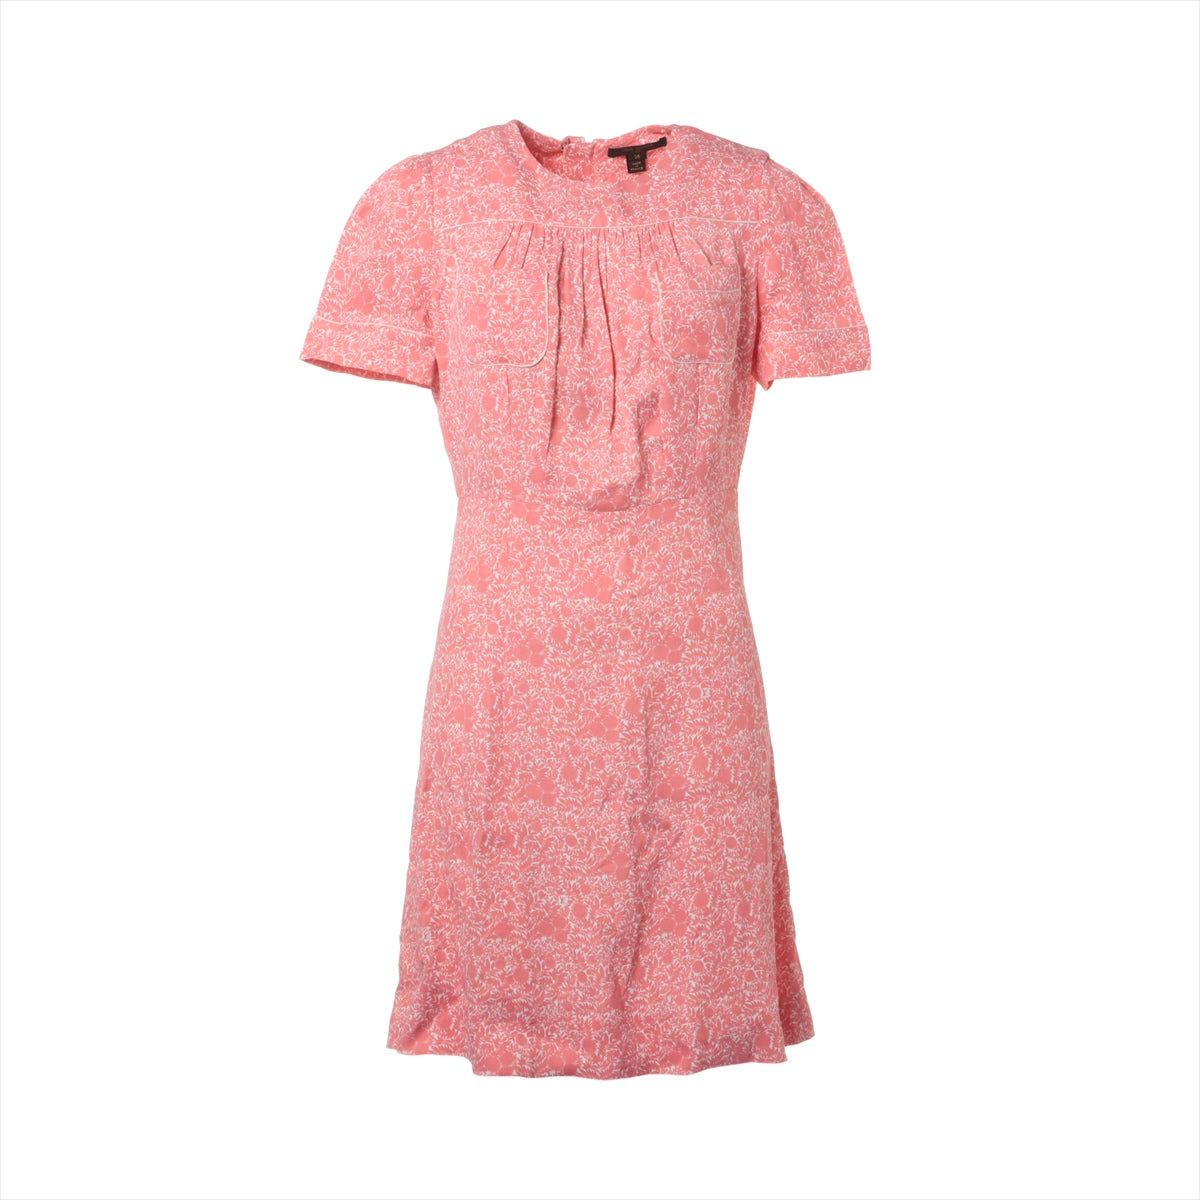 Louis Vuitton Unknown material Dress 36 Ladies' Pink No sign tag